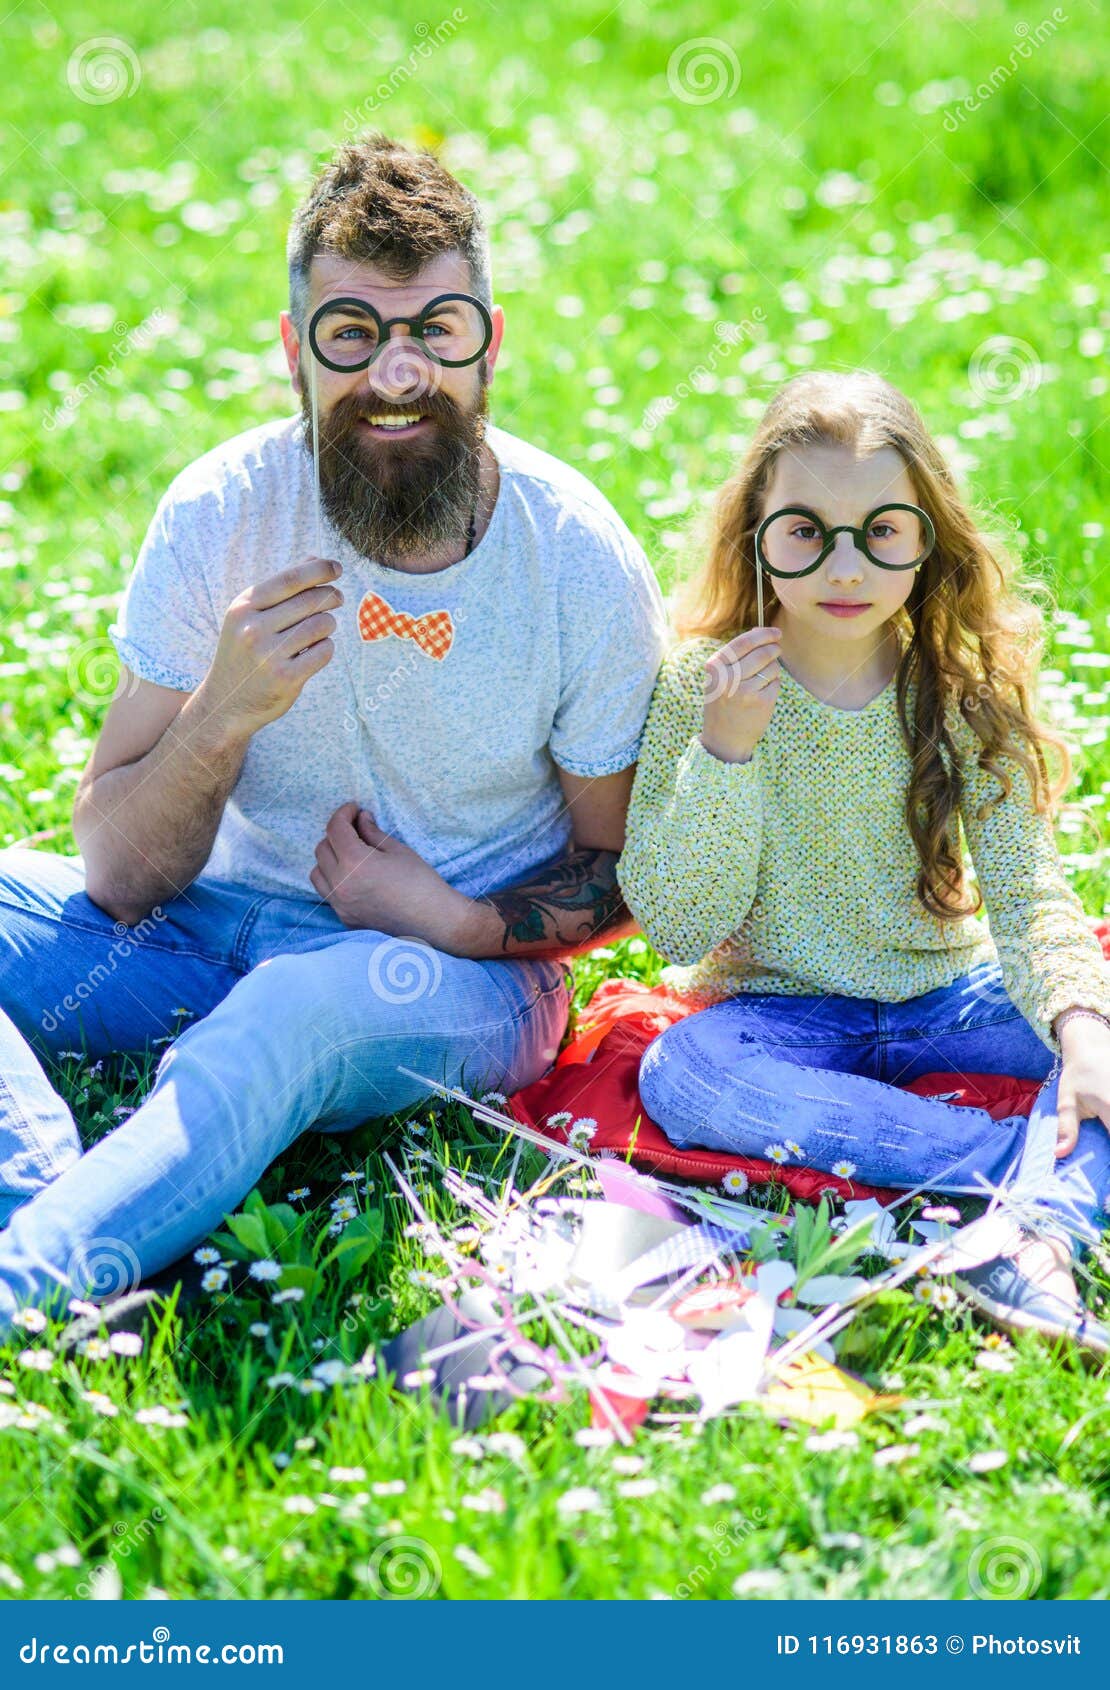 dad and daughter sits on grass at grassplot, green background. child and father posing with eyeglases photo booth